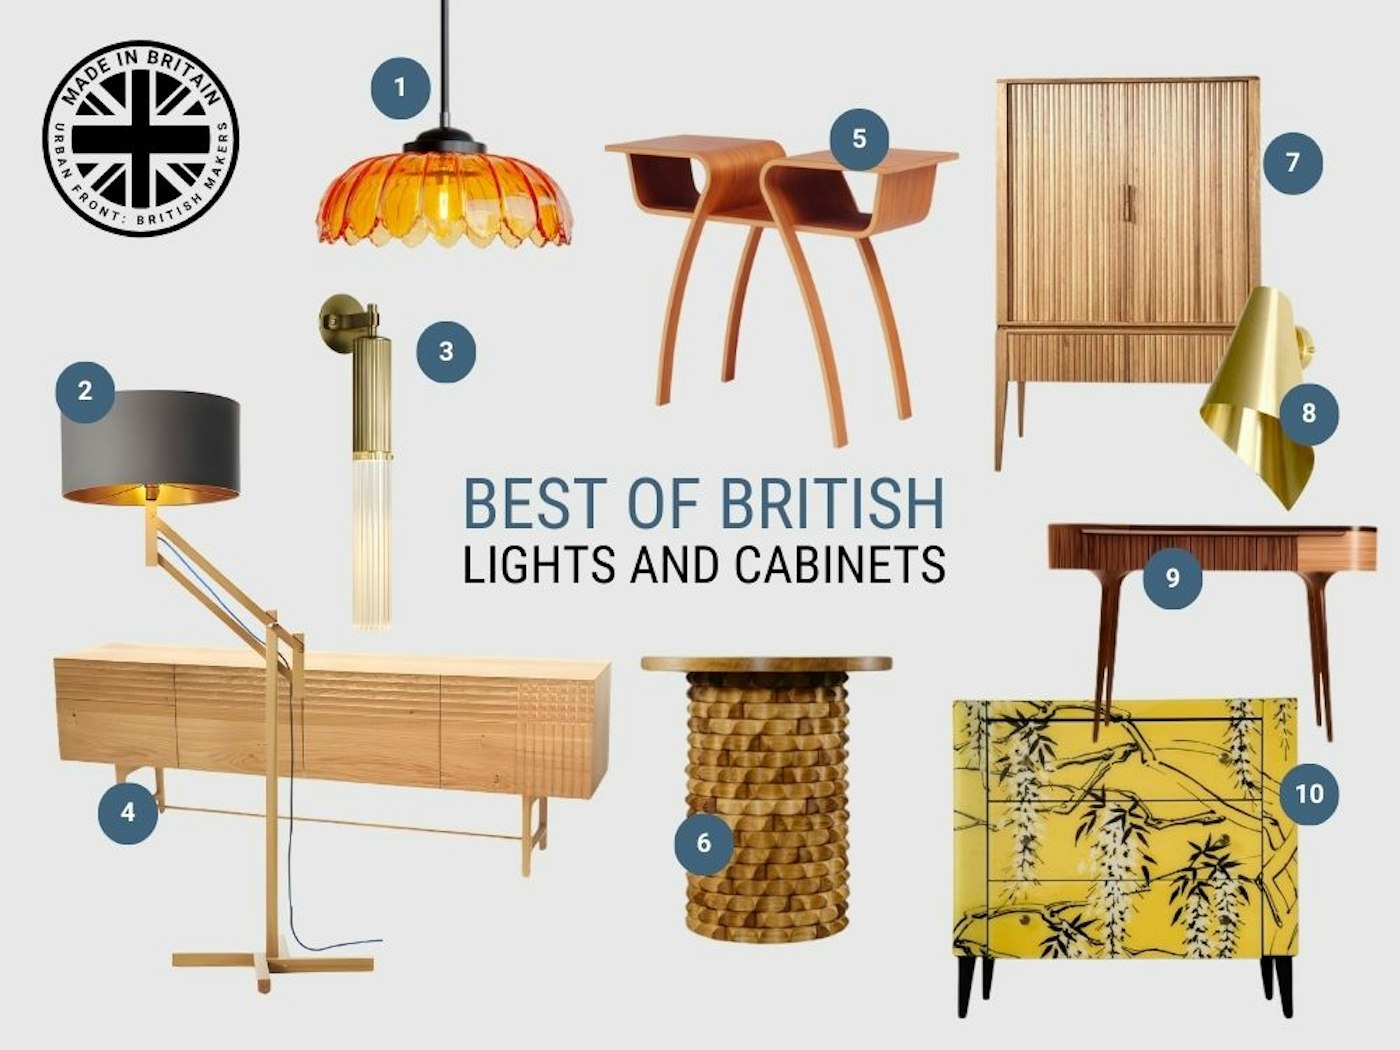 Best of British lights and cabinets